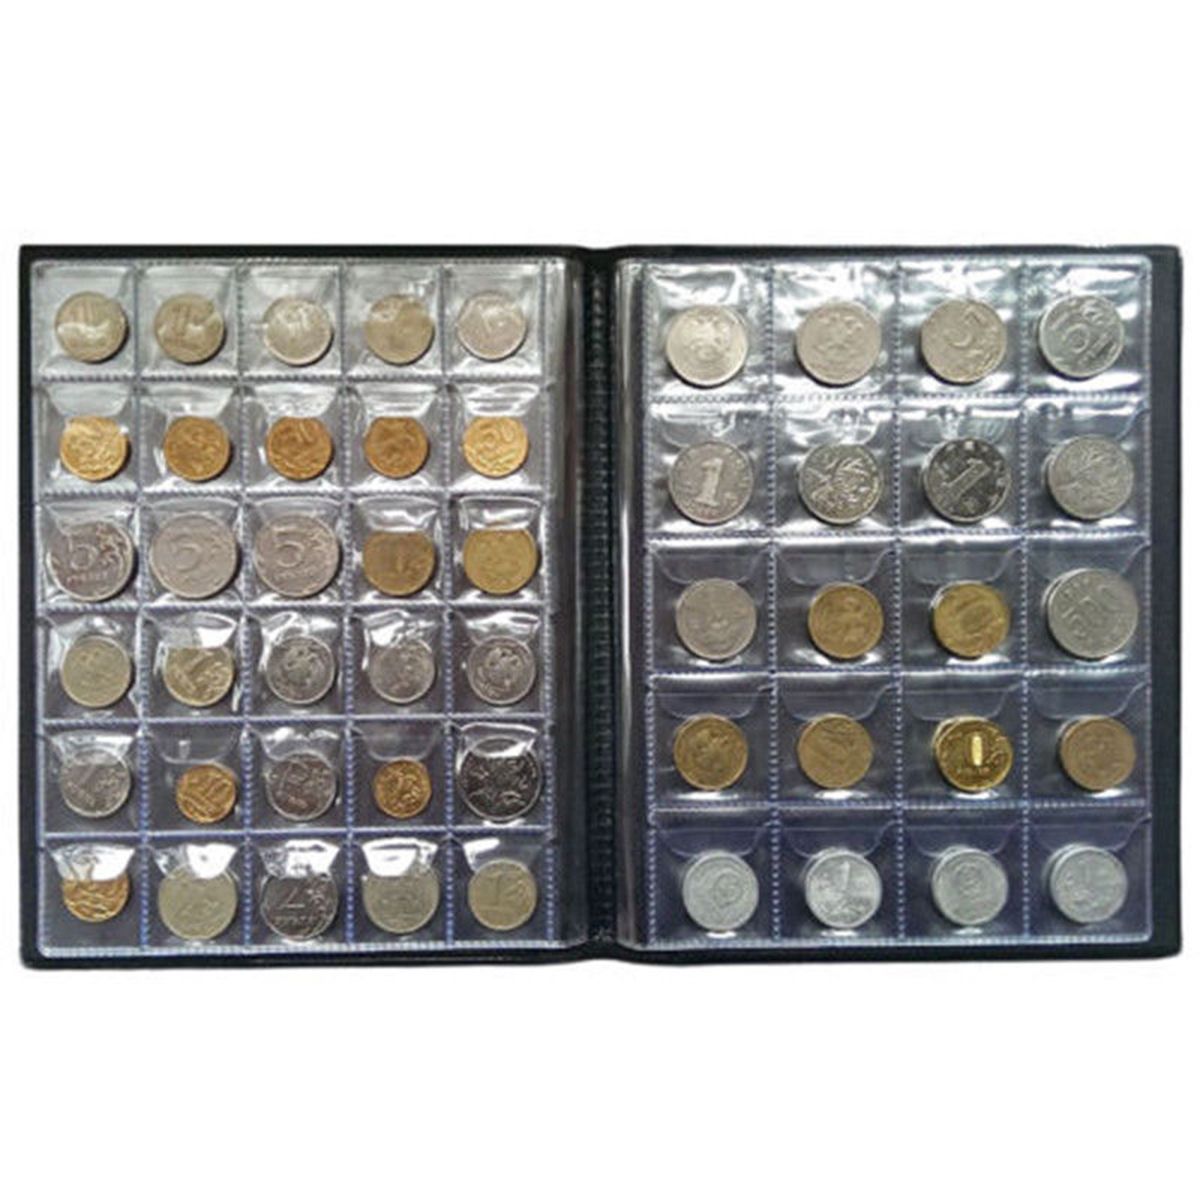 250-Coin-Holder-Collection-Storage-Collecting-Money-Penny-Pockets-Album-Book-Decor-Gifts-1400069